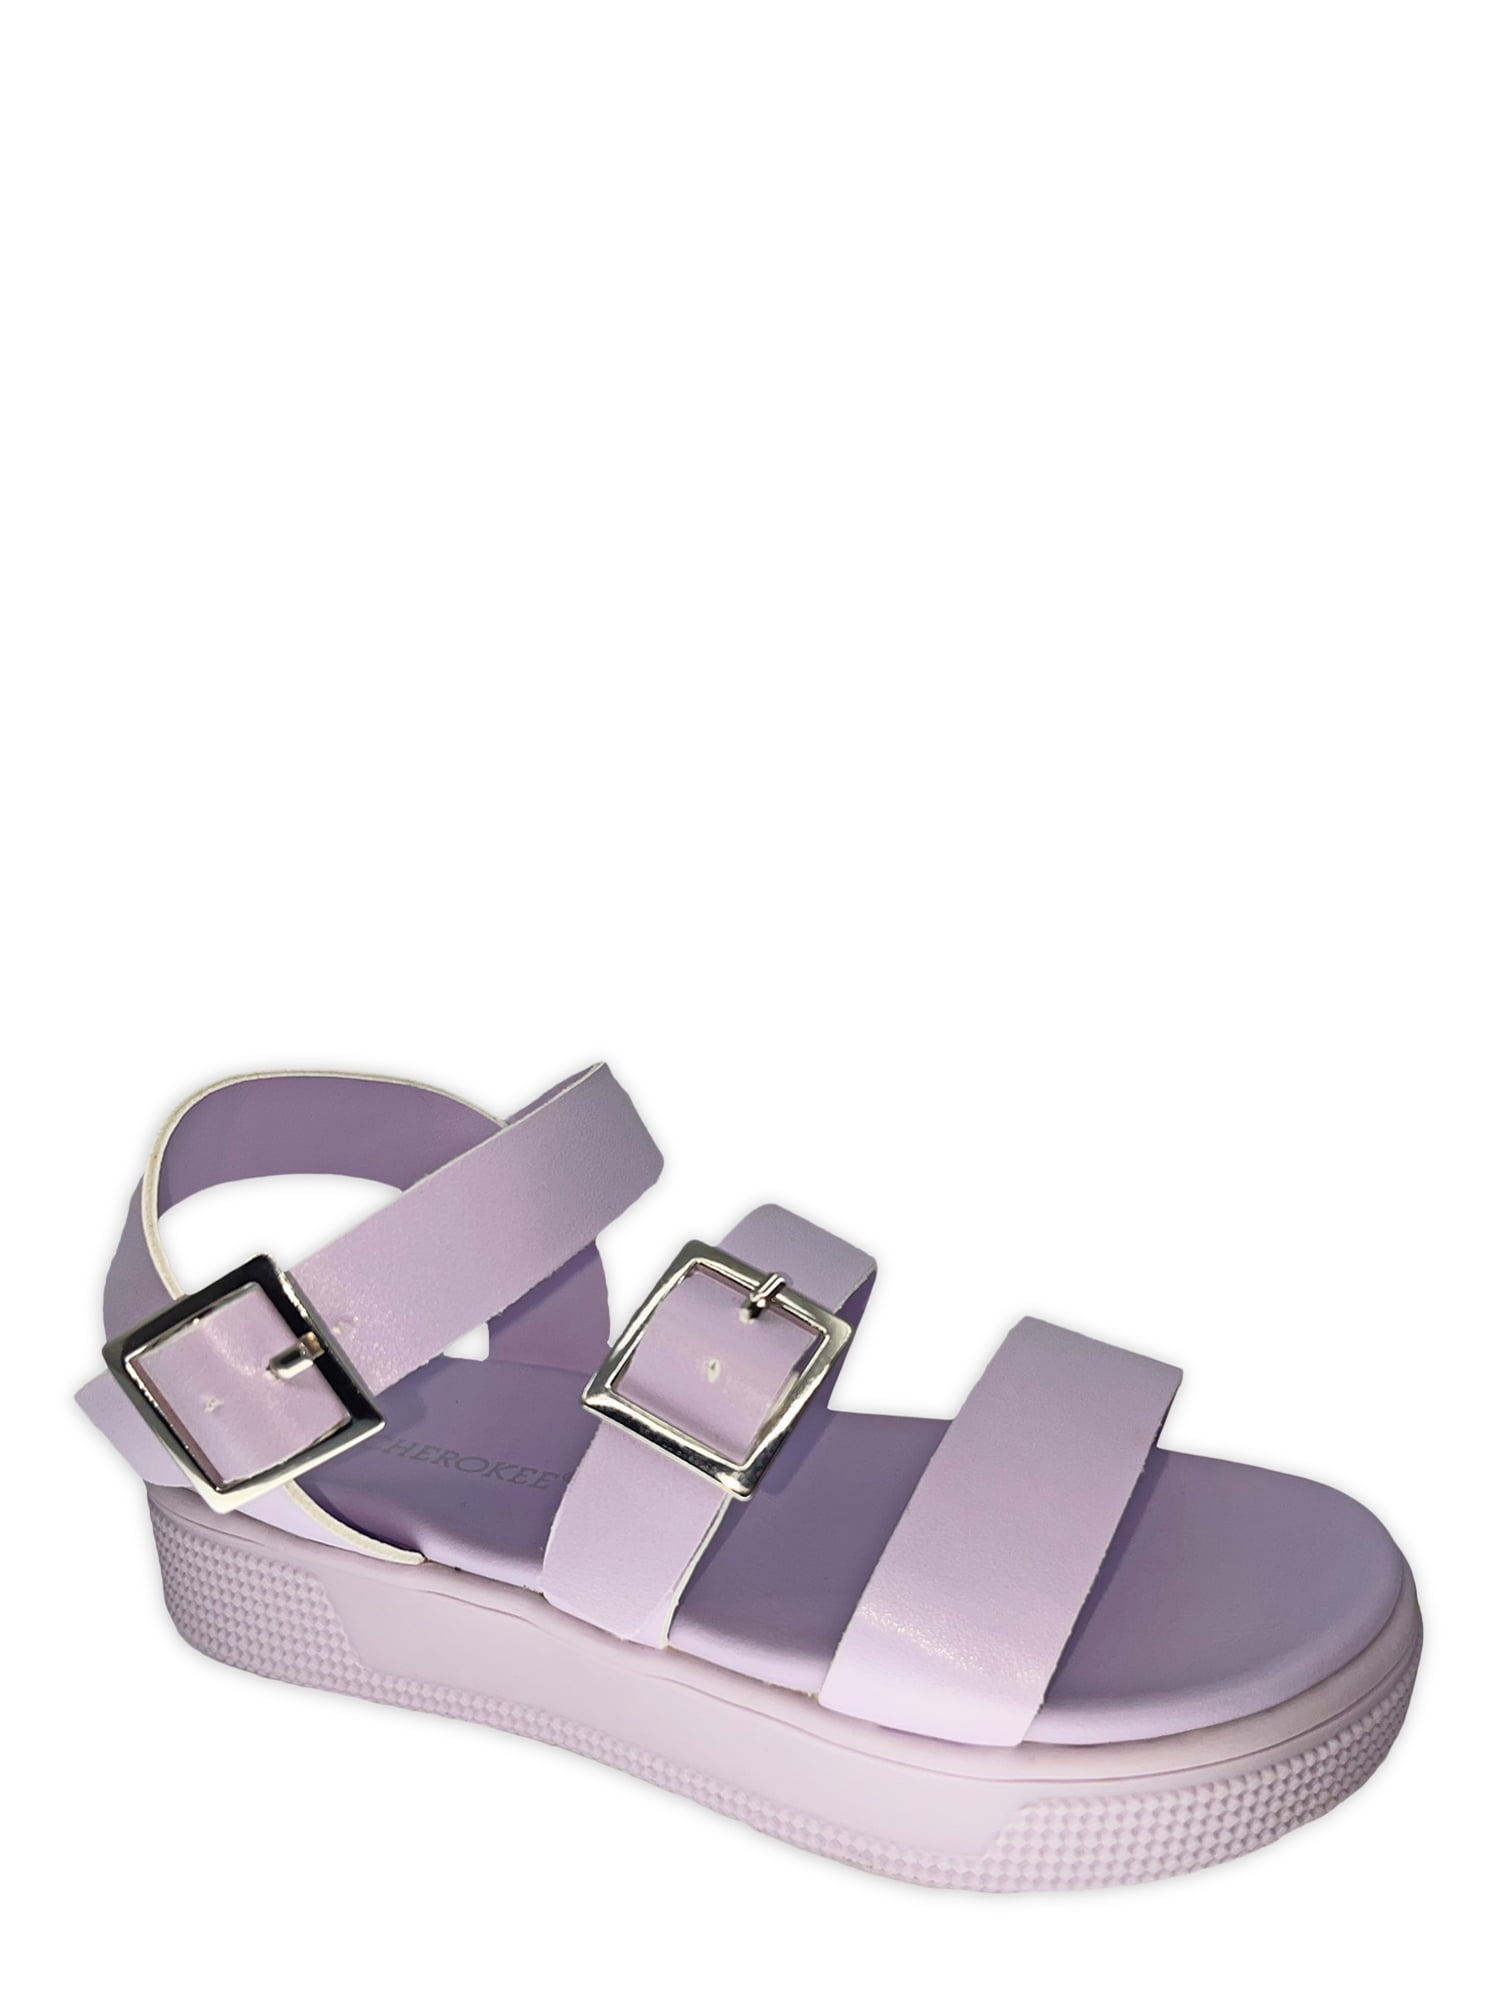 Girls' Sandals (11-3): Cherokee Platform, Material Girl Butterfly Gladiator, Love 83 Clog, Rocawear Embellished Flat & More $6 + Free S&H w/ Walmart+ or $35+